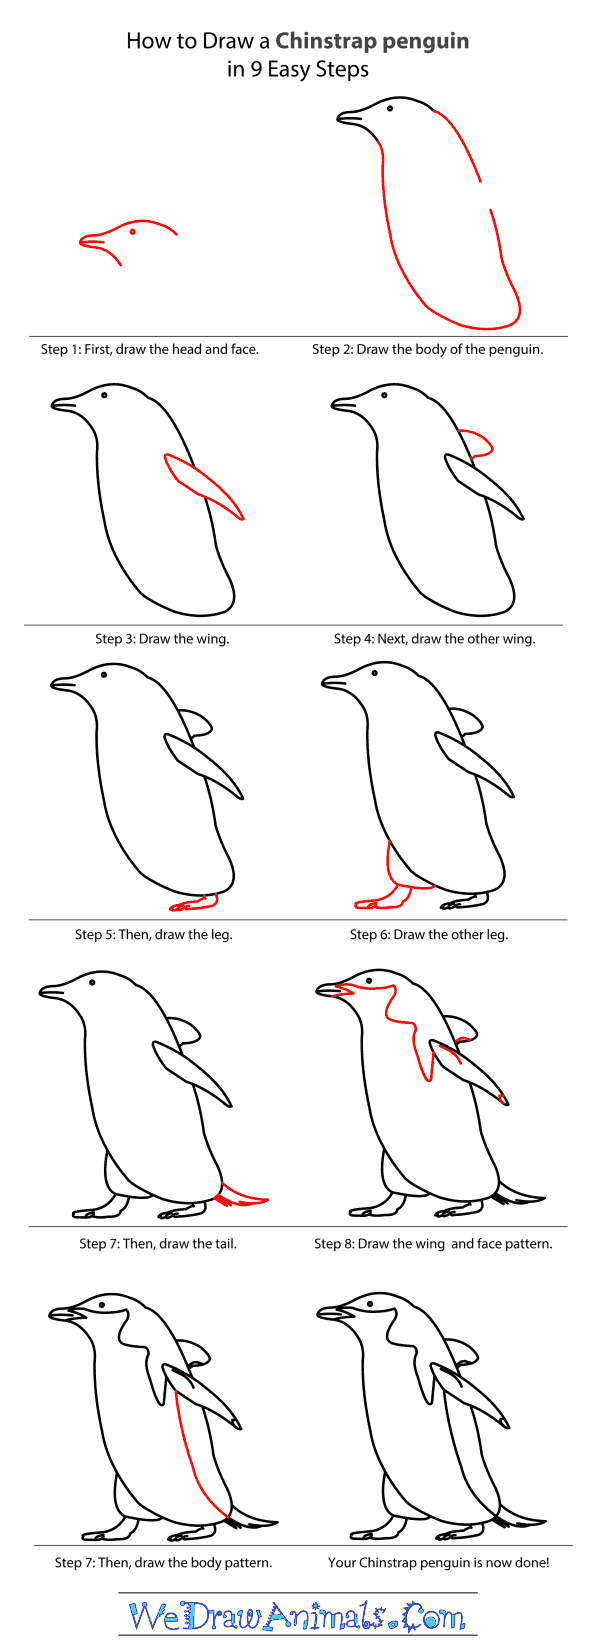 How to Draw a Chinstrap Penguin - Step-by-Step Tutorial